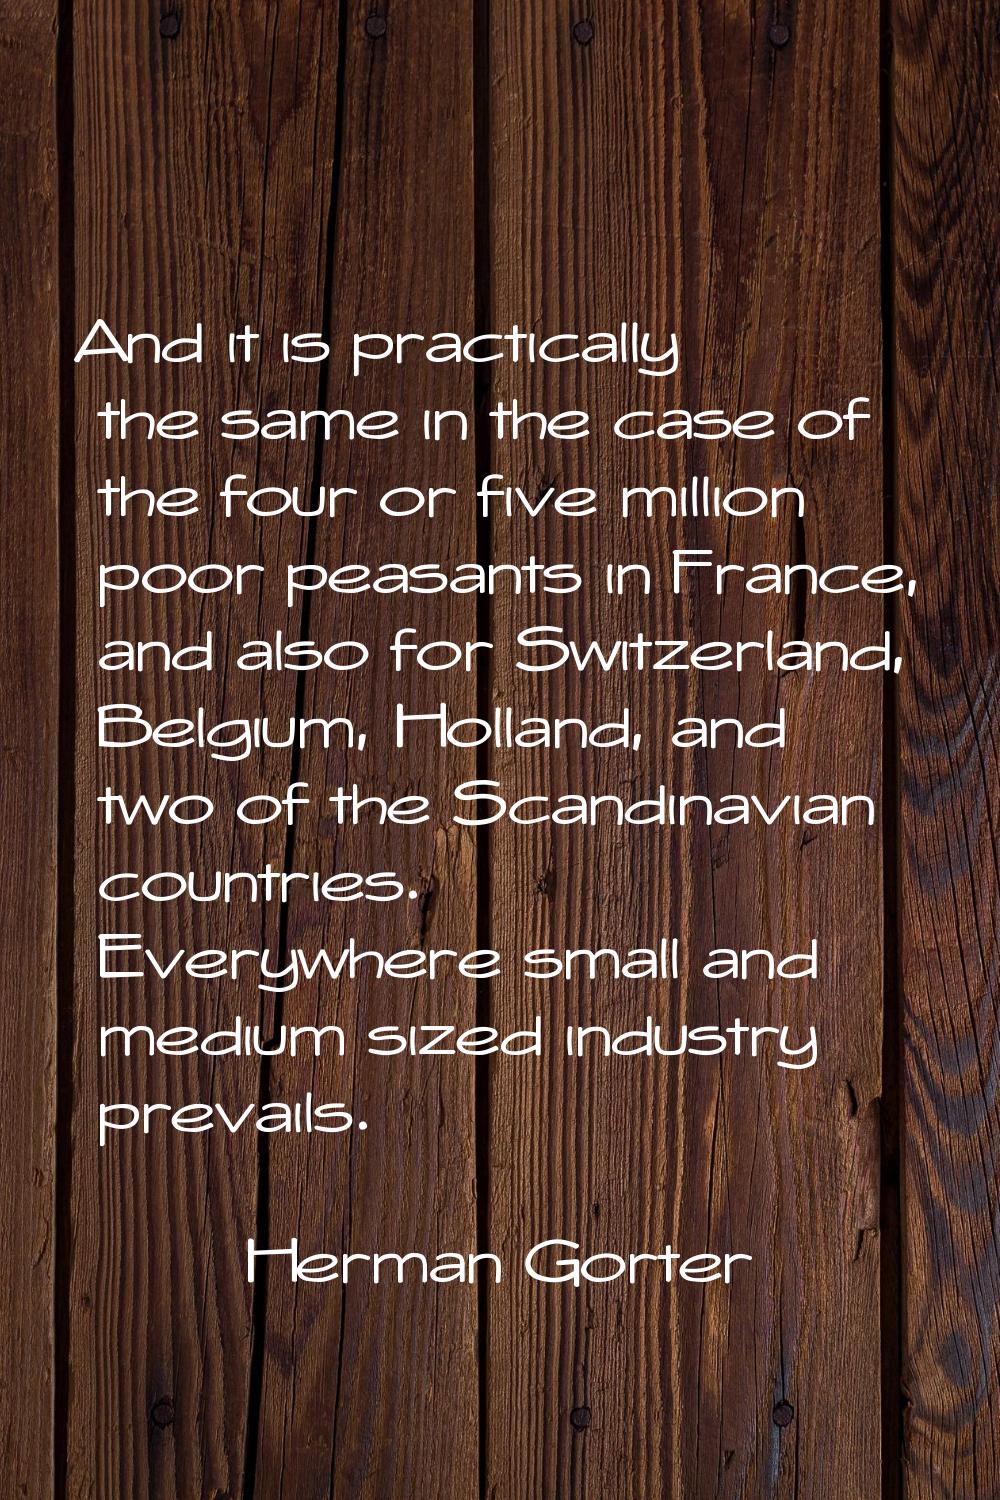 And it is practically the same in the case of the four or five million poor peasants in France, and